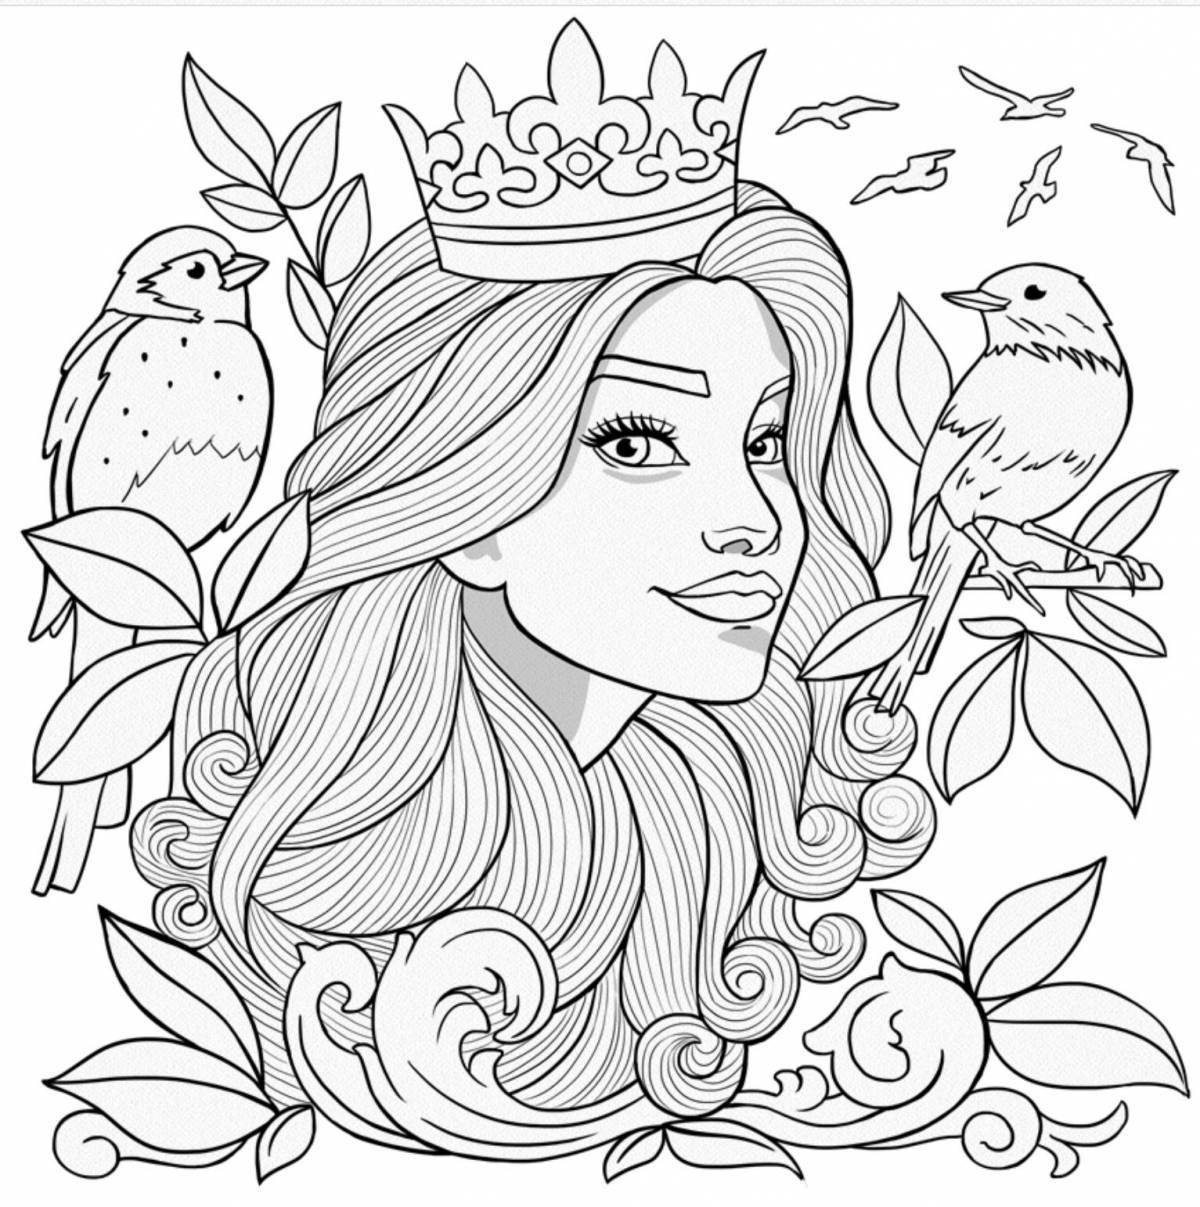 Great coloring book for girls 16 years old